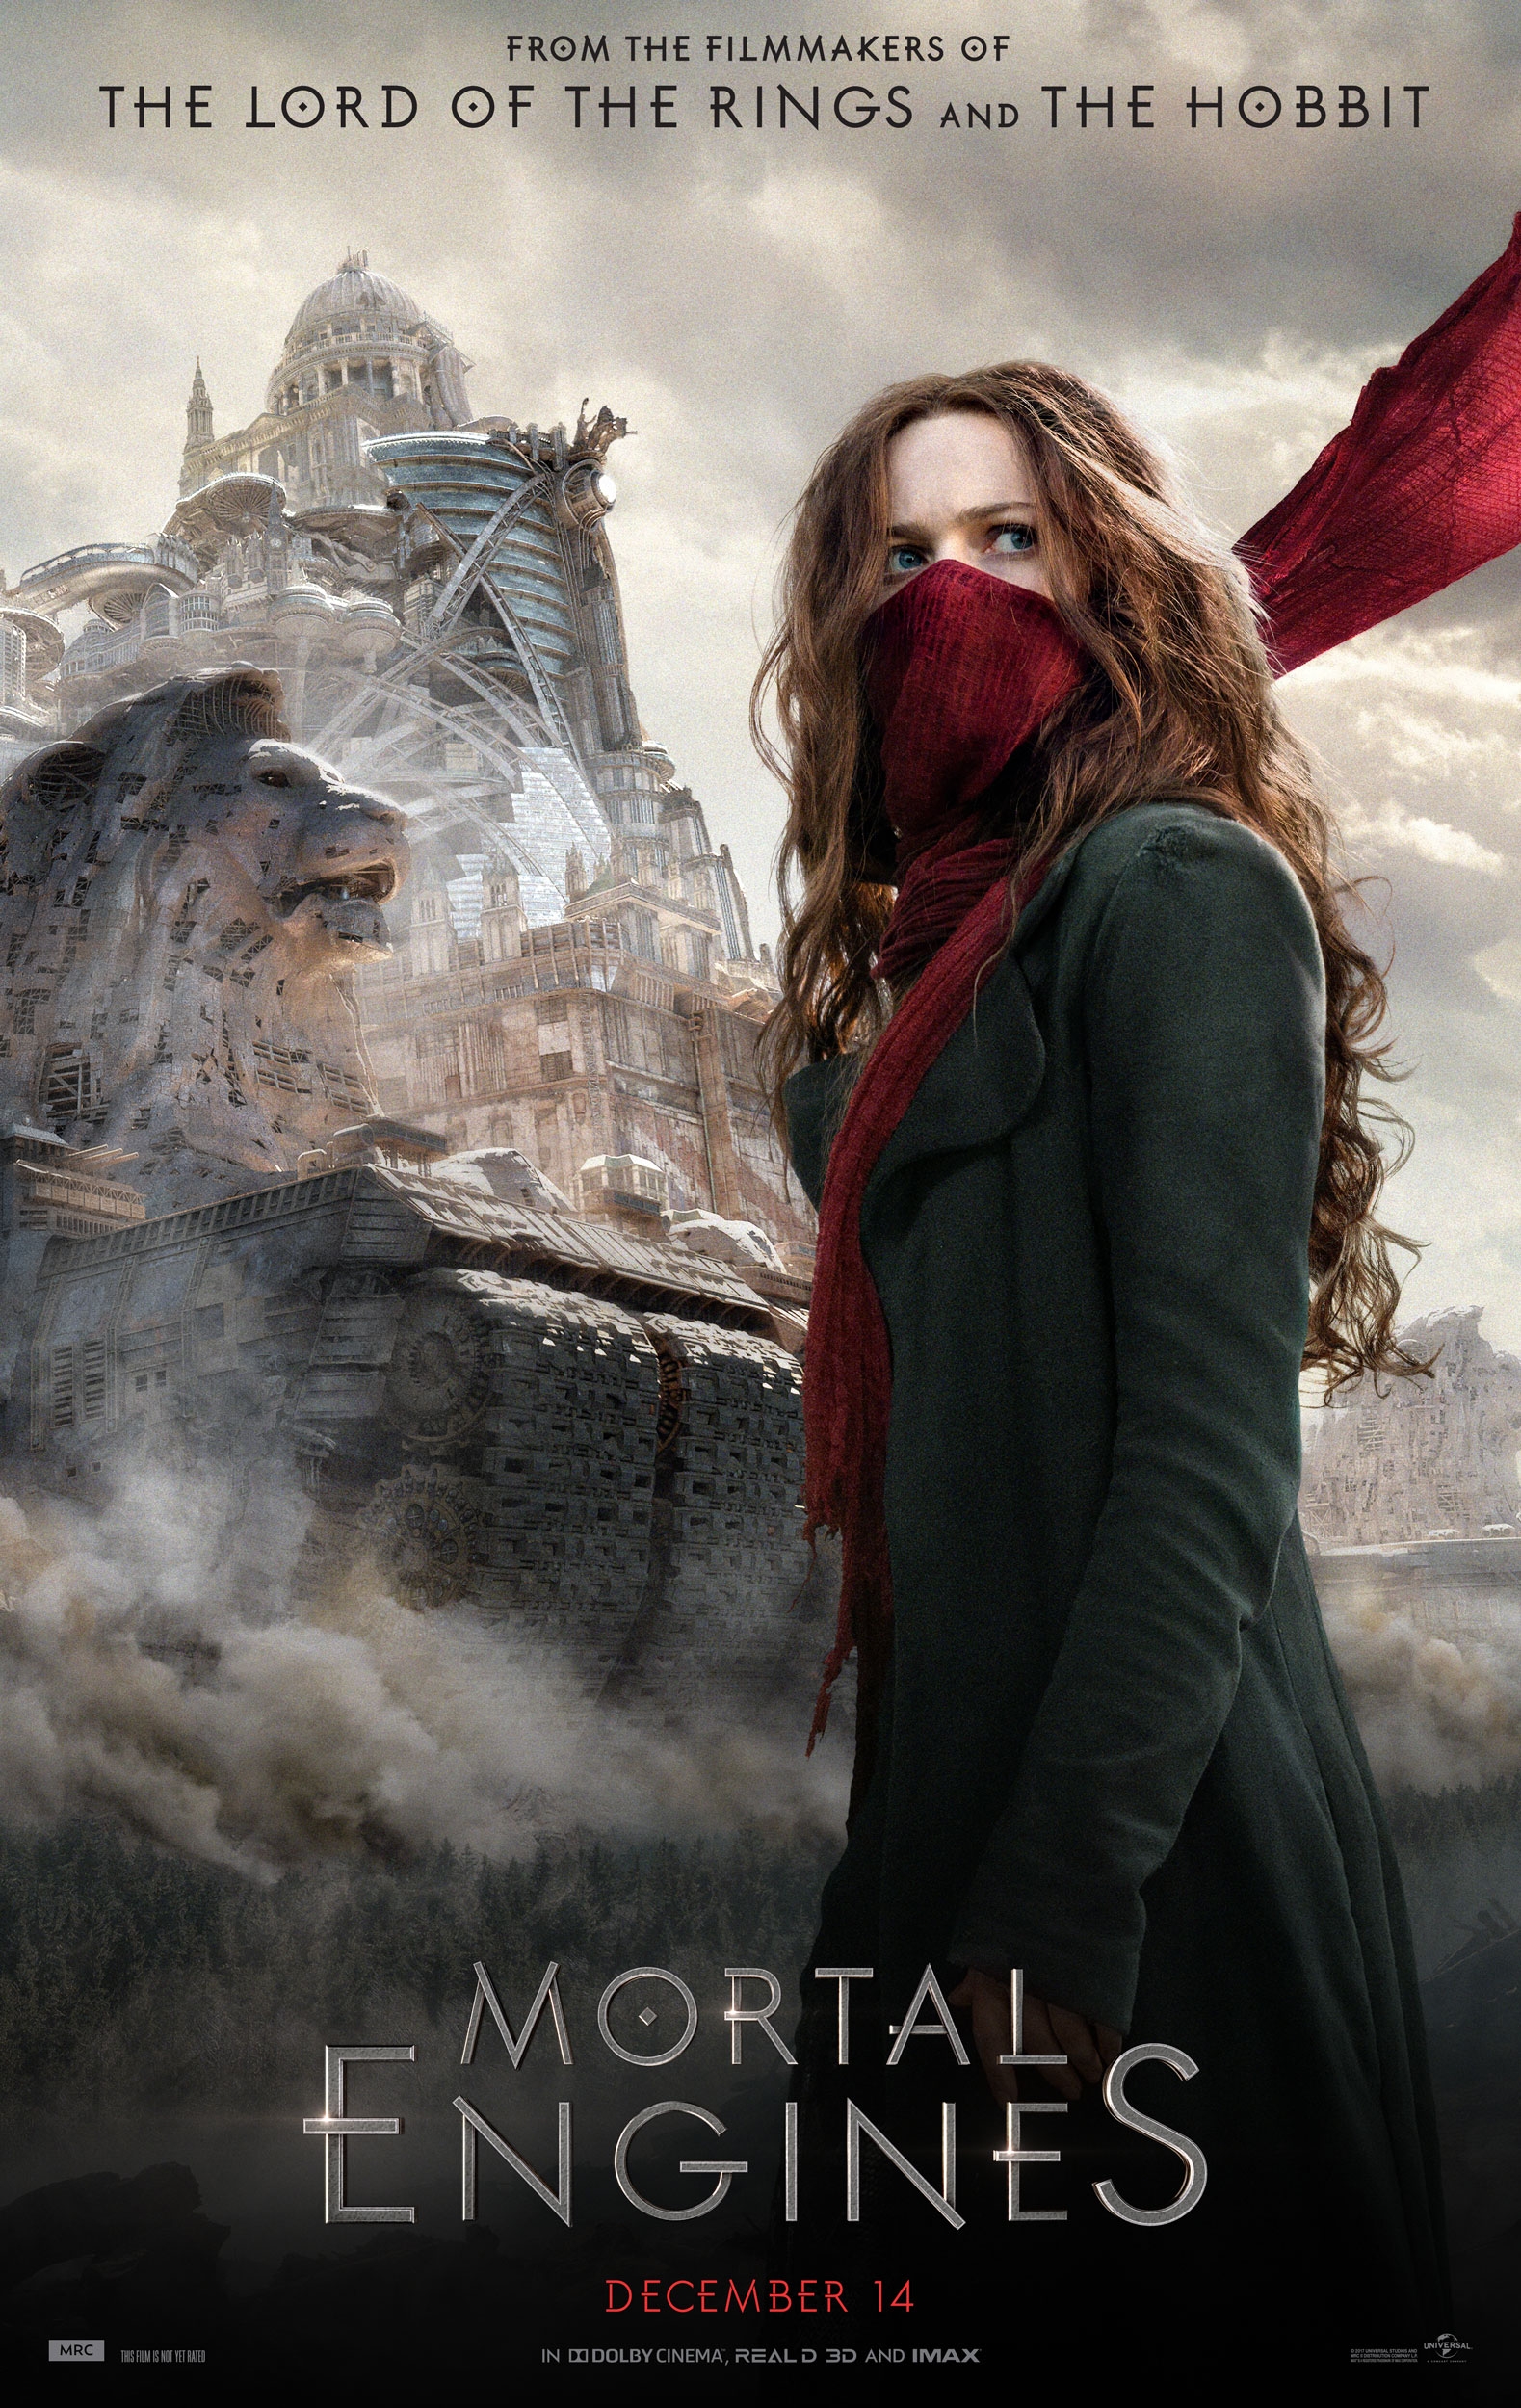 "Mortal engines", lacked high-octane narrative fuel to give this fantasy movie a sufficient cinematic combustion.